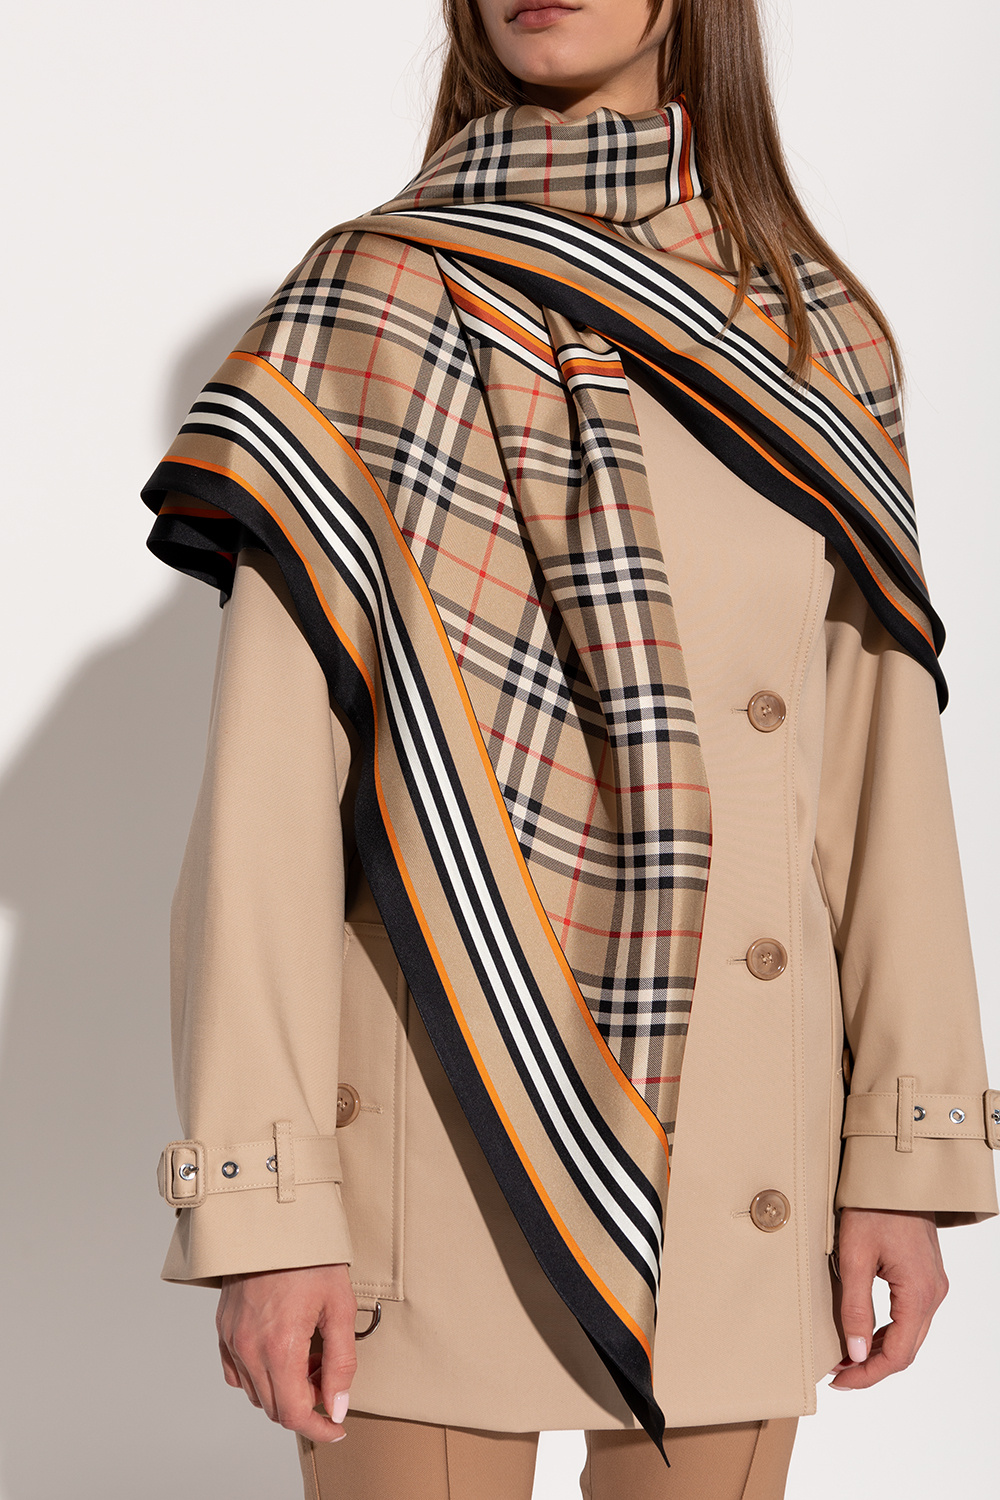 Burberry Archive Scarf Print Shirt Online, SAVE 46